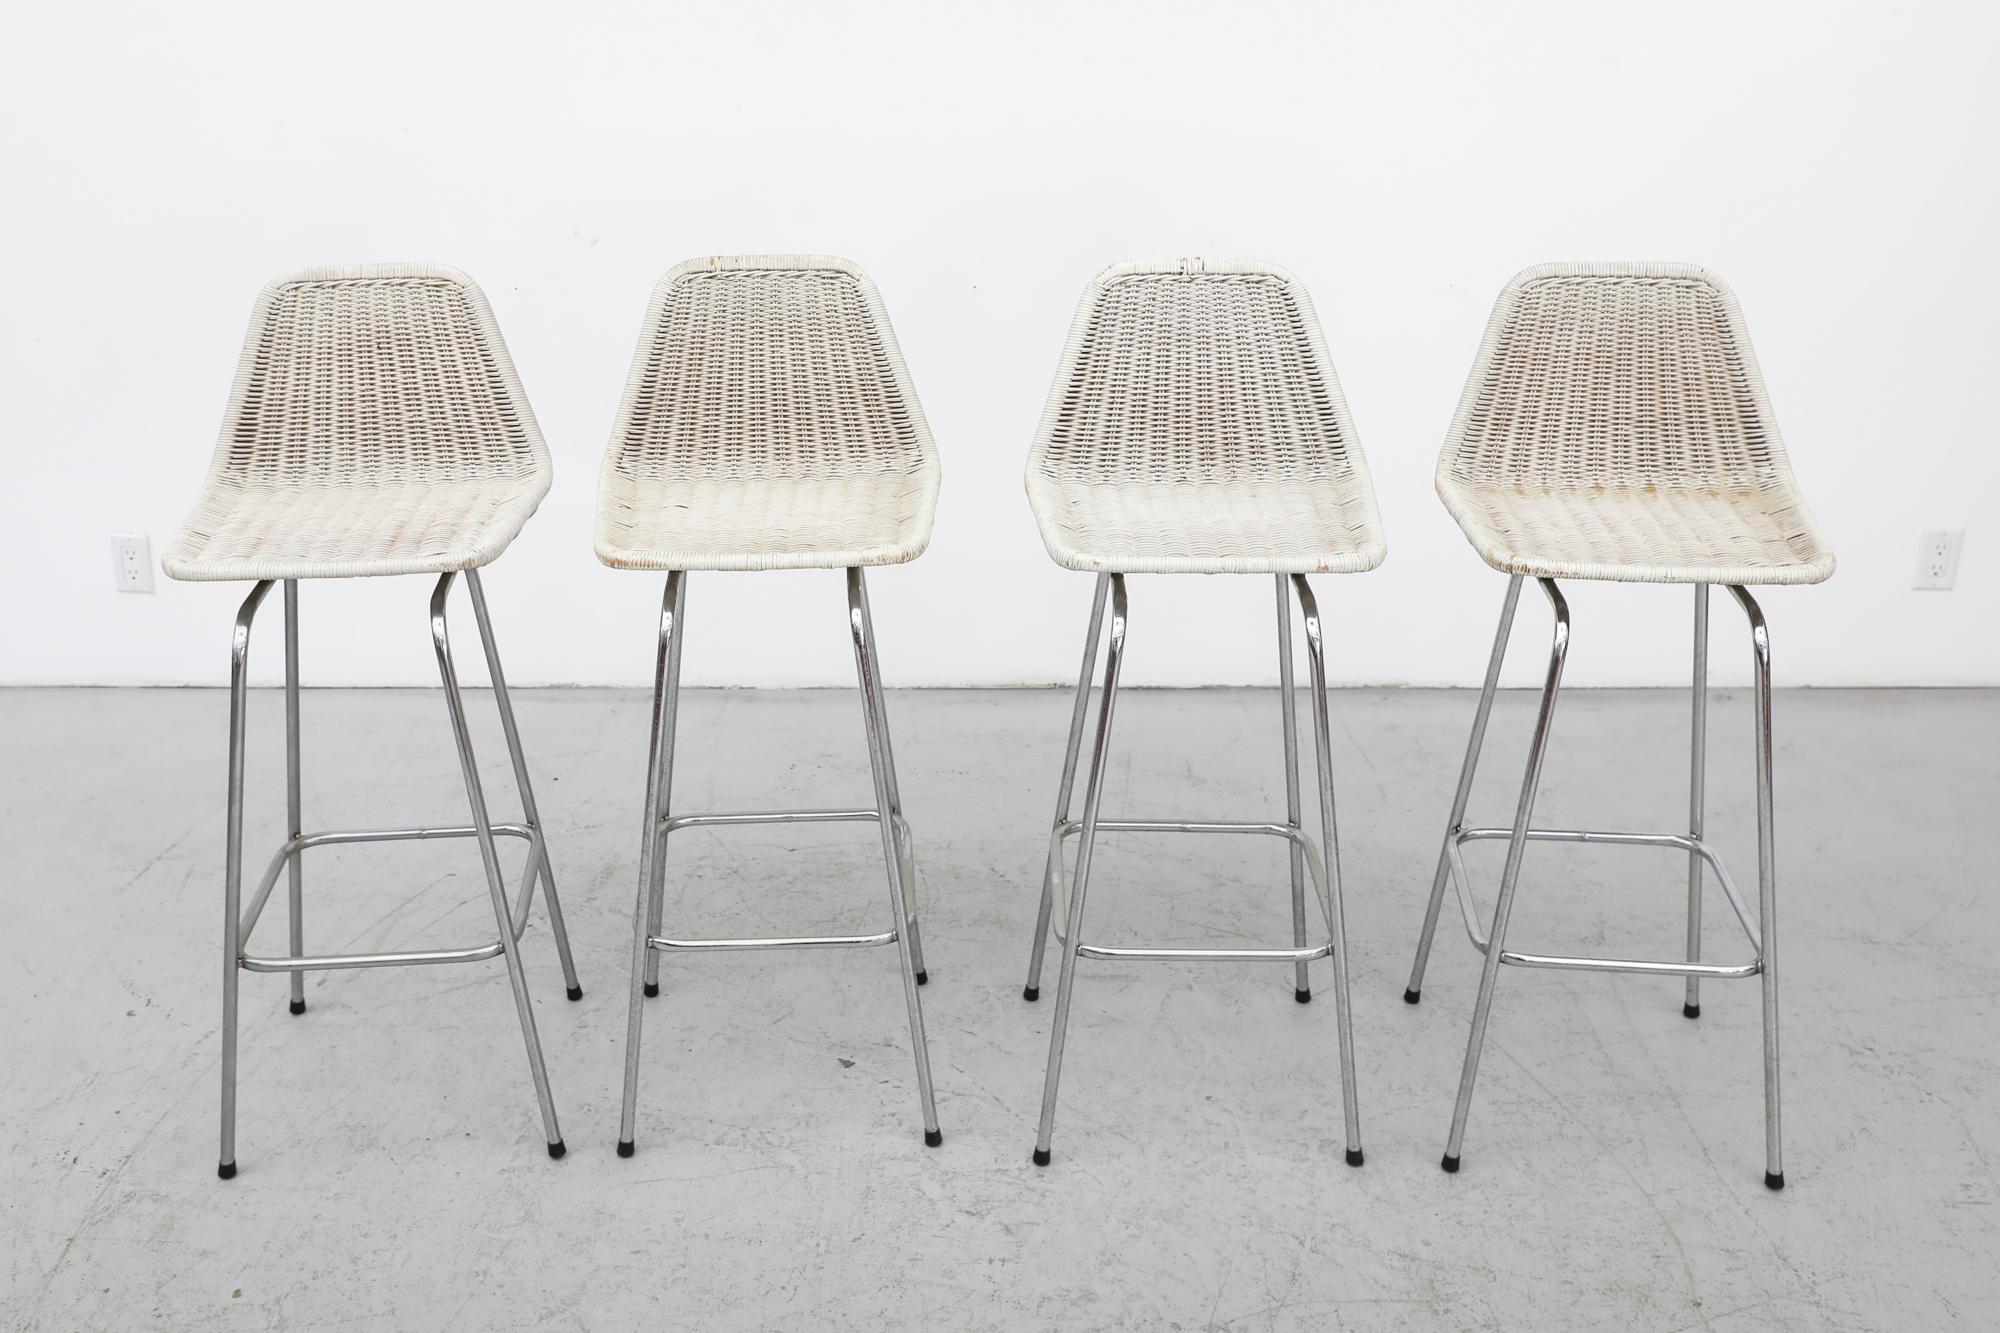 Set of 4 Charlotte Perriand Style Wicker Bar Height Stools with Chrome Legs In Good Condition For Sale In Los Angeles, CA